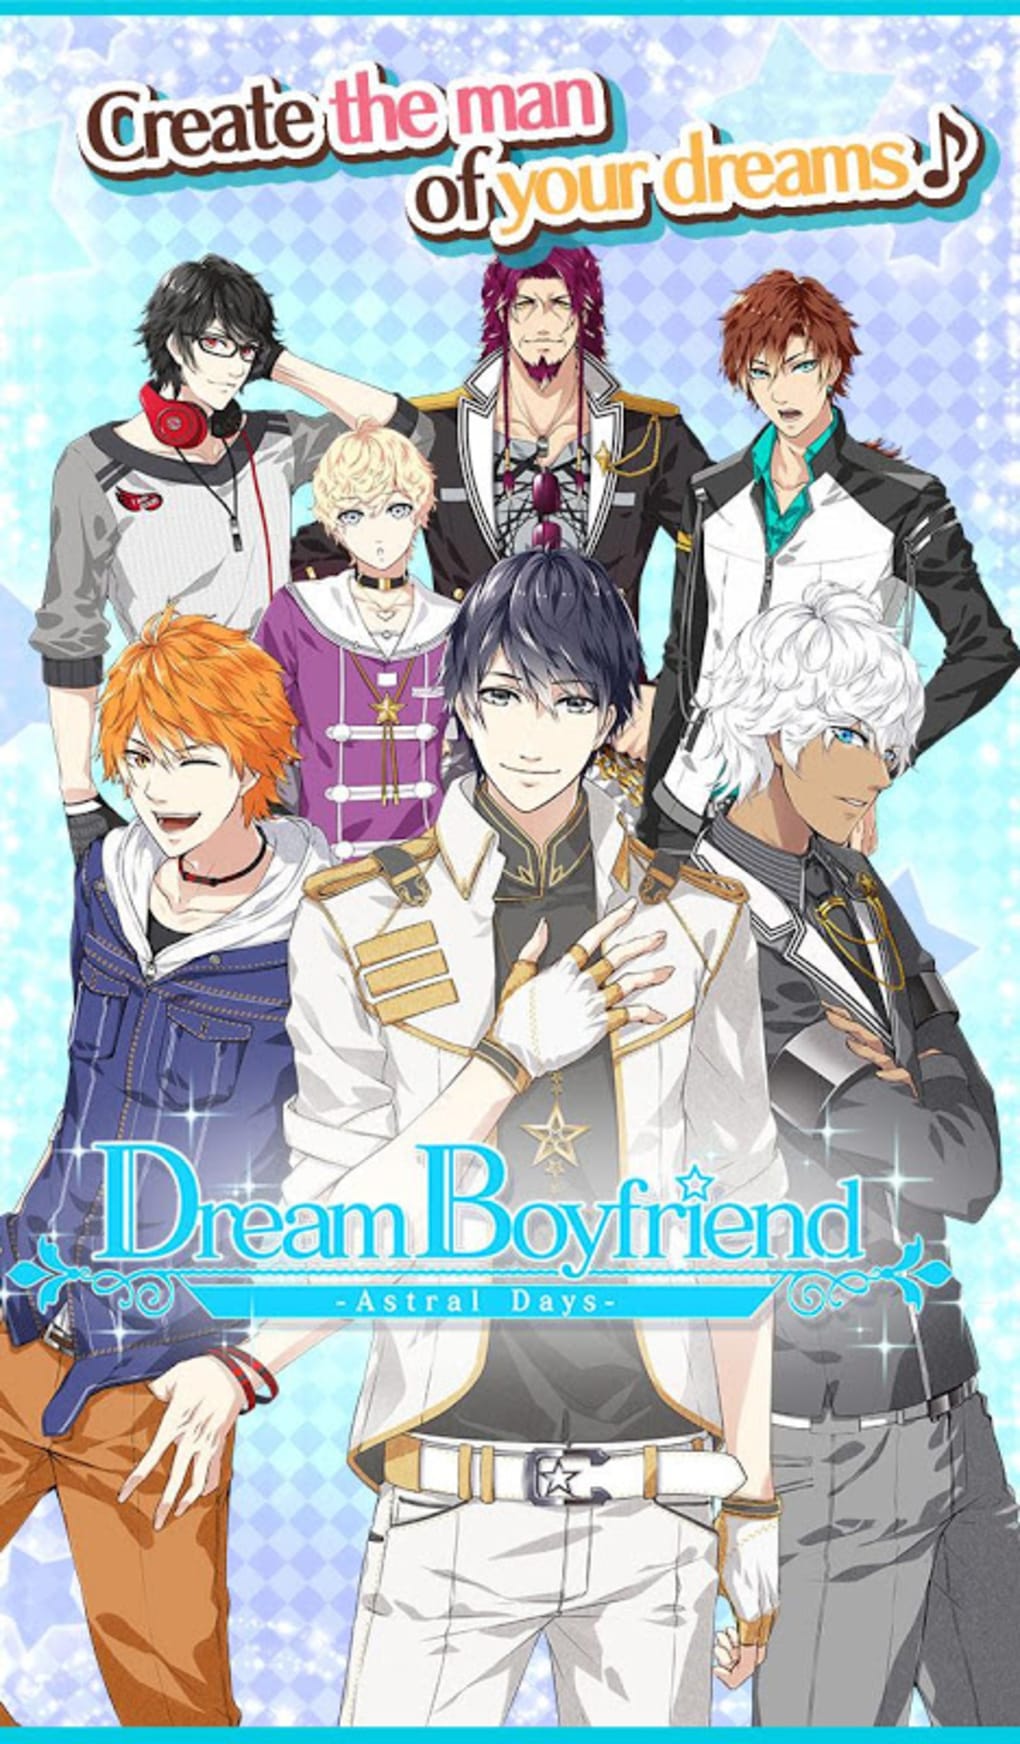 Boyfriend Maker APK for Android Download